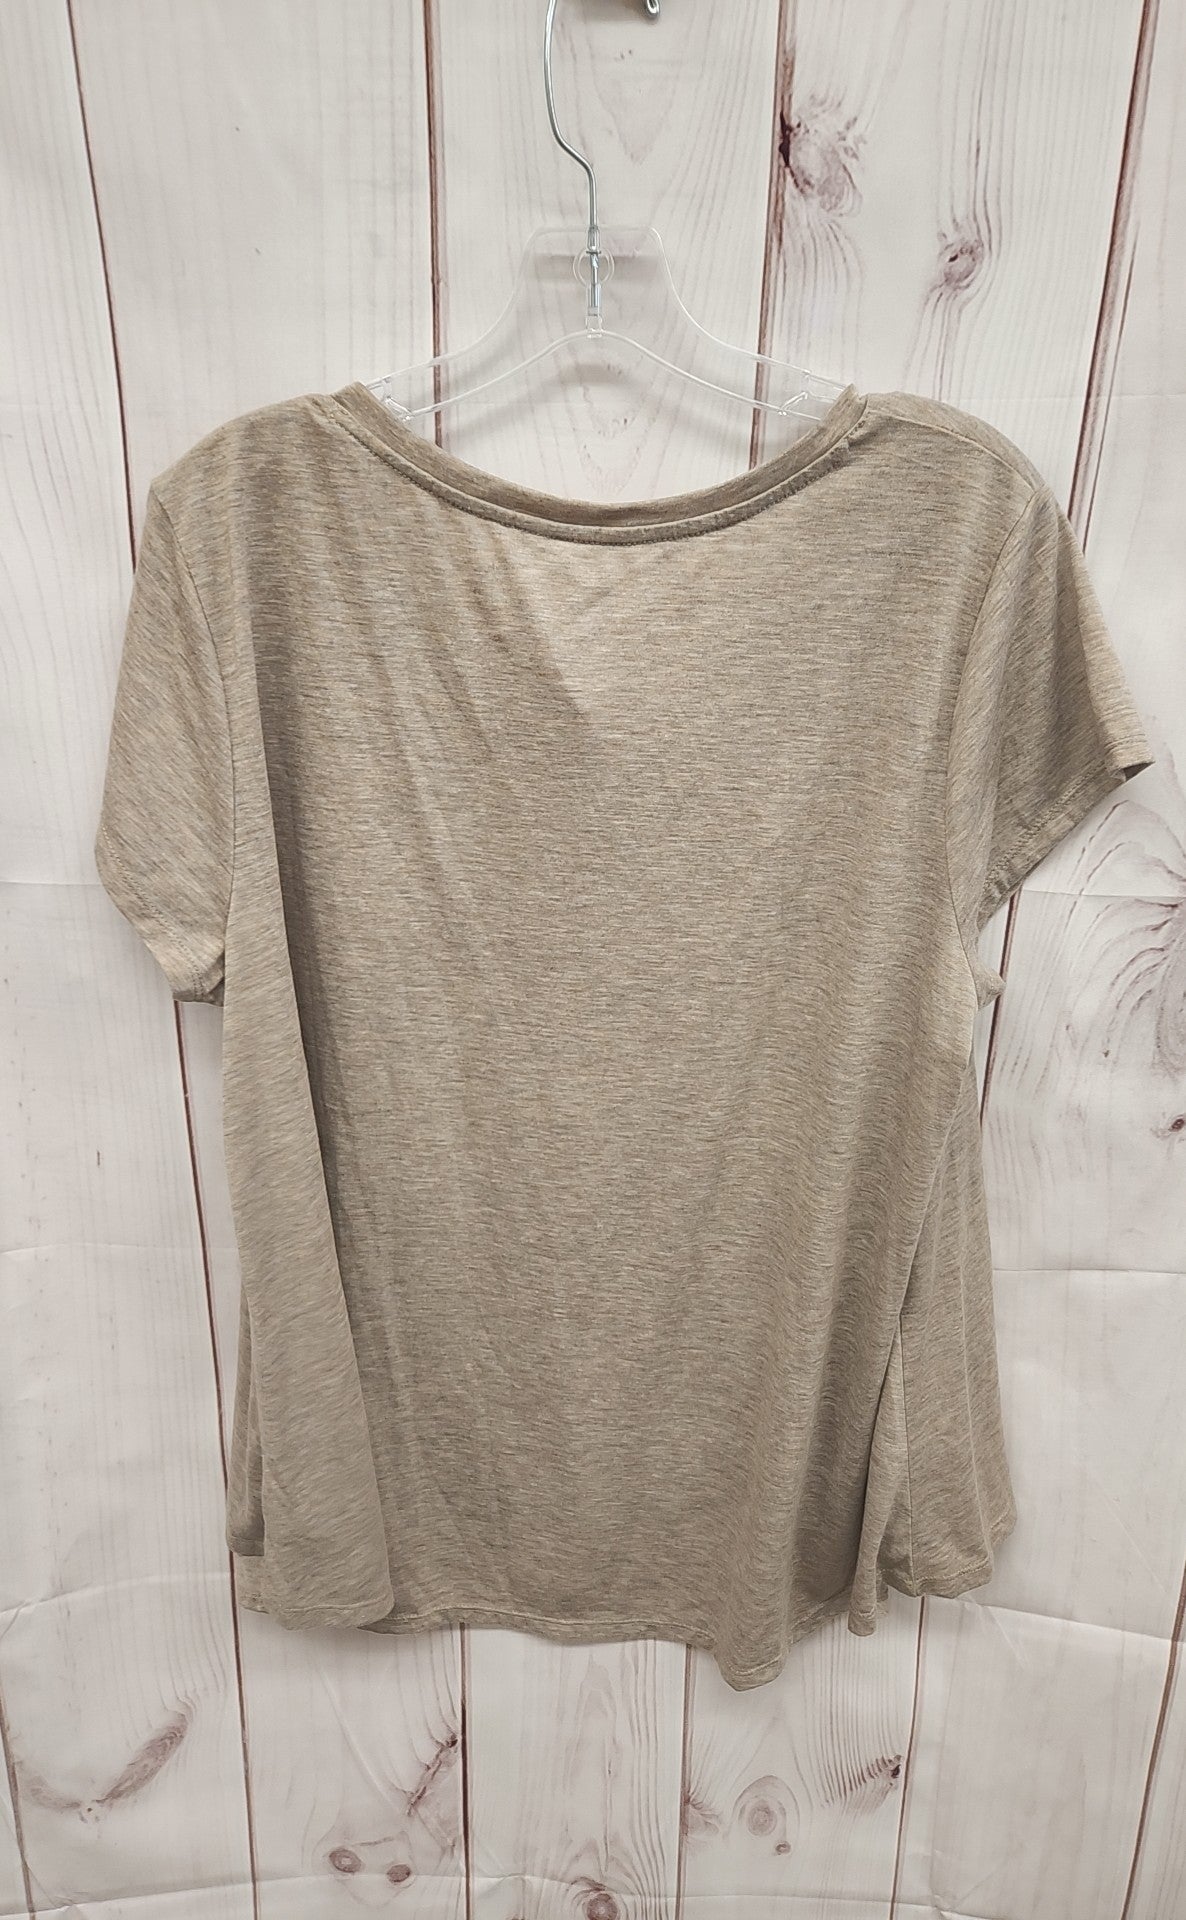 Style & Co Women's Size XL Brown Short Sleeve Top